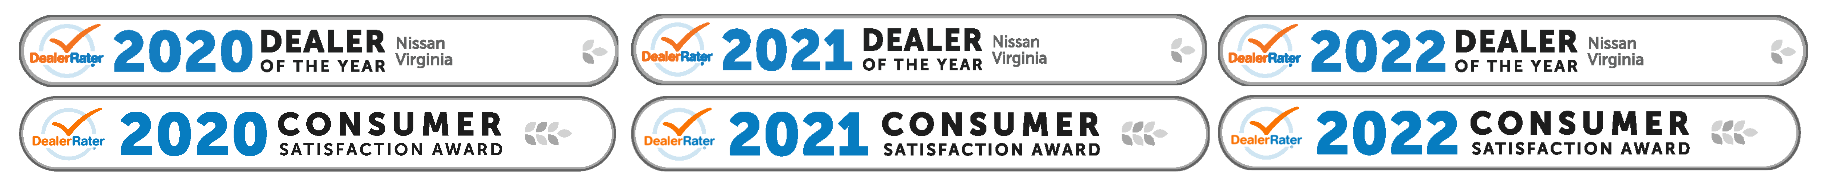 Dealer Rater Awards, Dealer of the year, Consumer satisfaction for 2020, 2021 and 2022